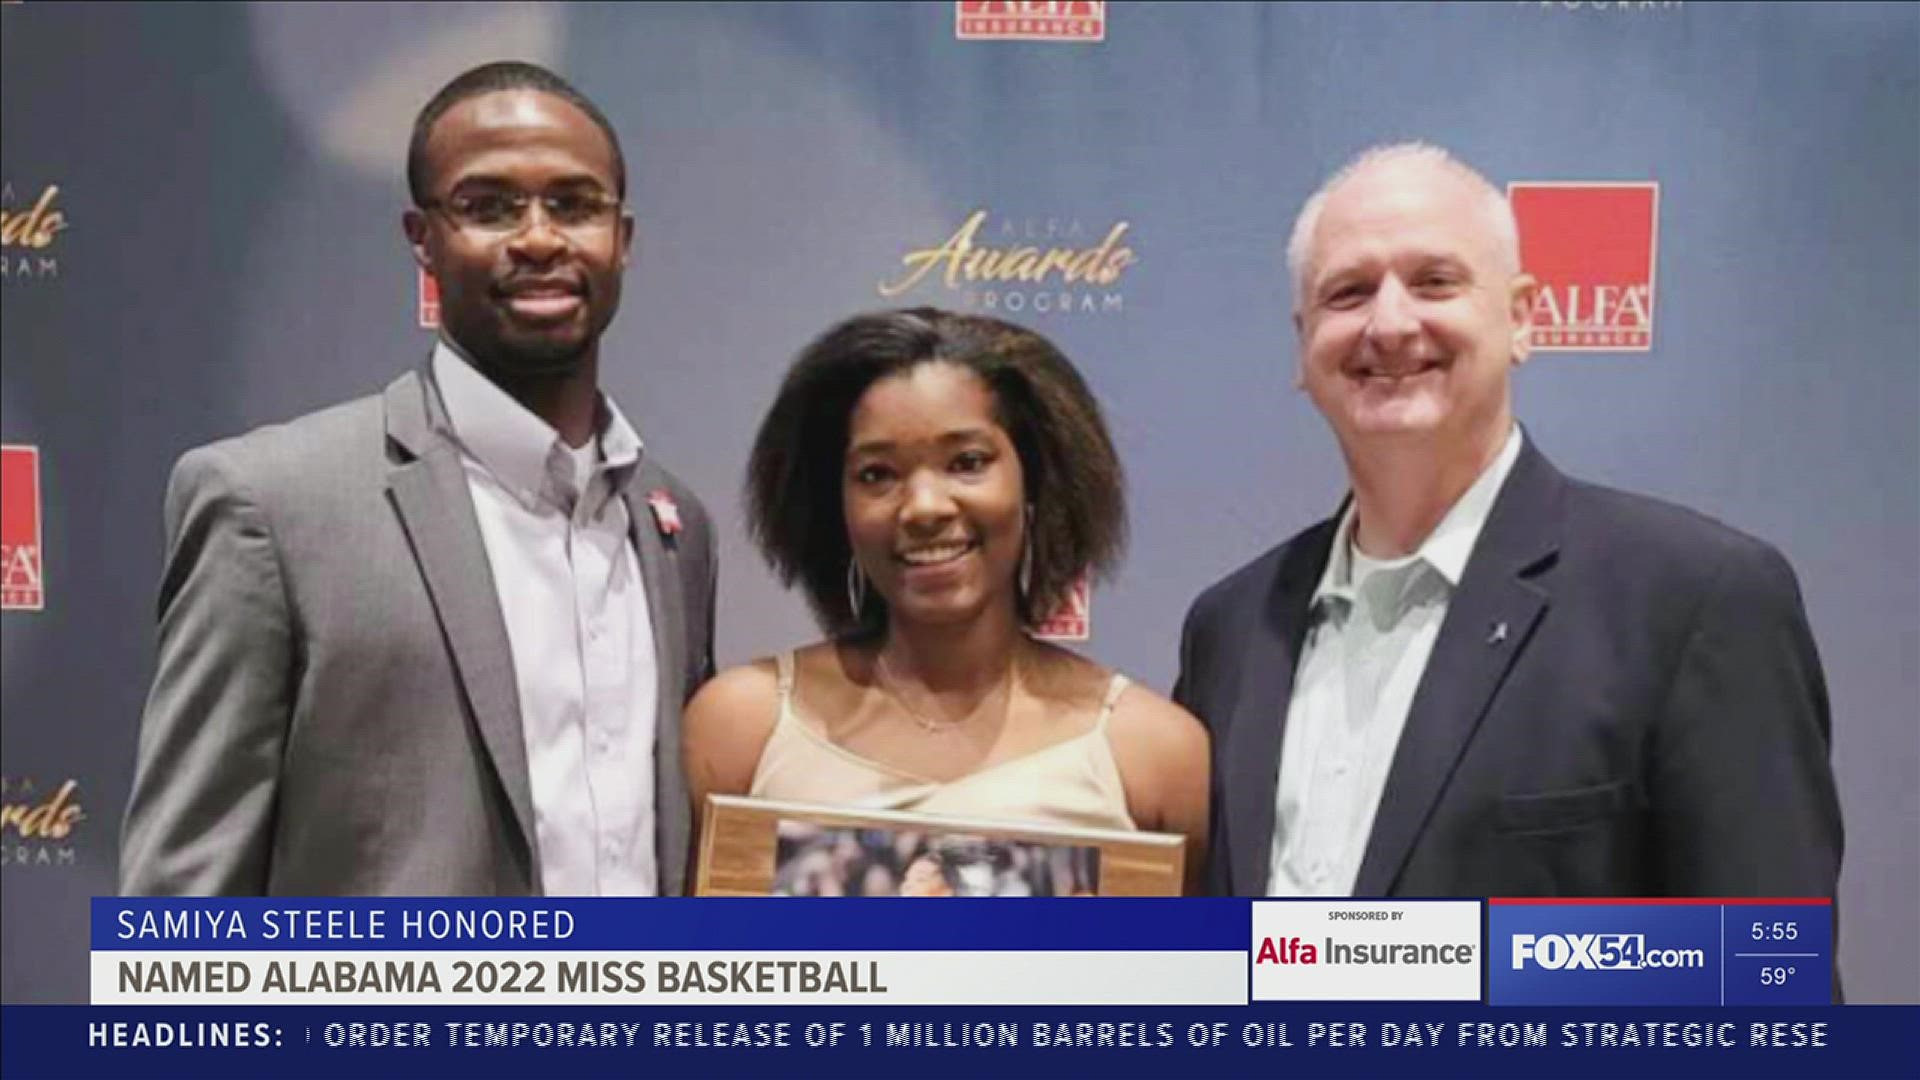 Samiya Steele is the first player from Hazel Green High School to receive the Miss Basketball Award which is given to the state's top basketball player.